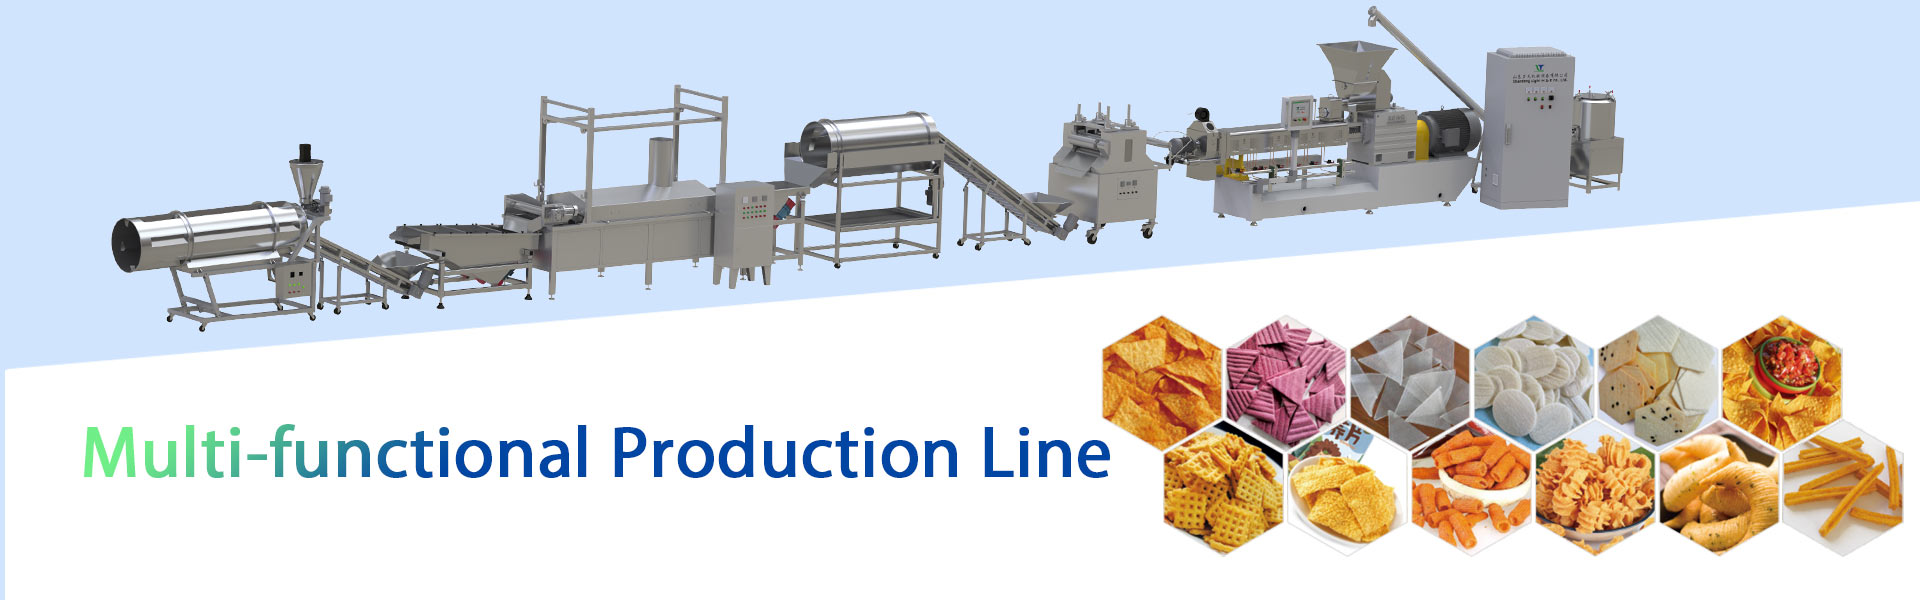 Multi-functional-Production-Line